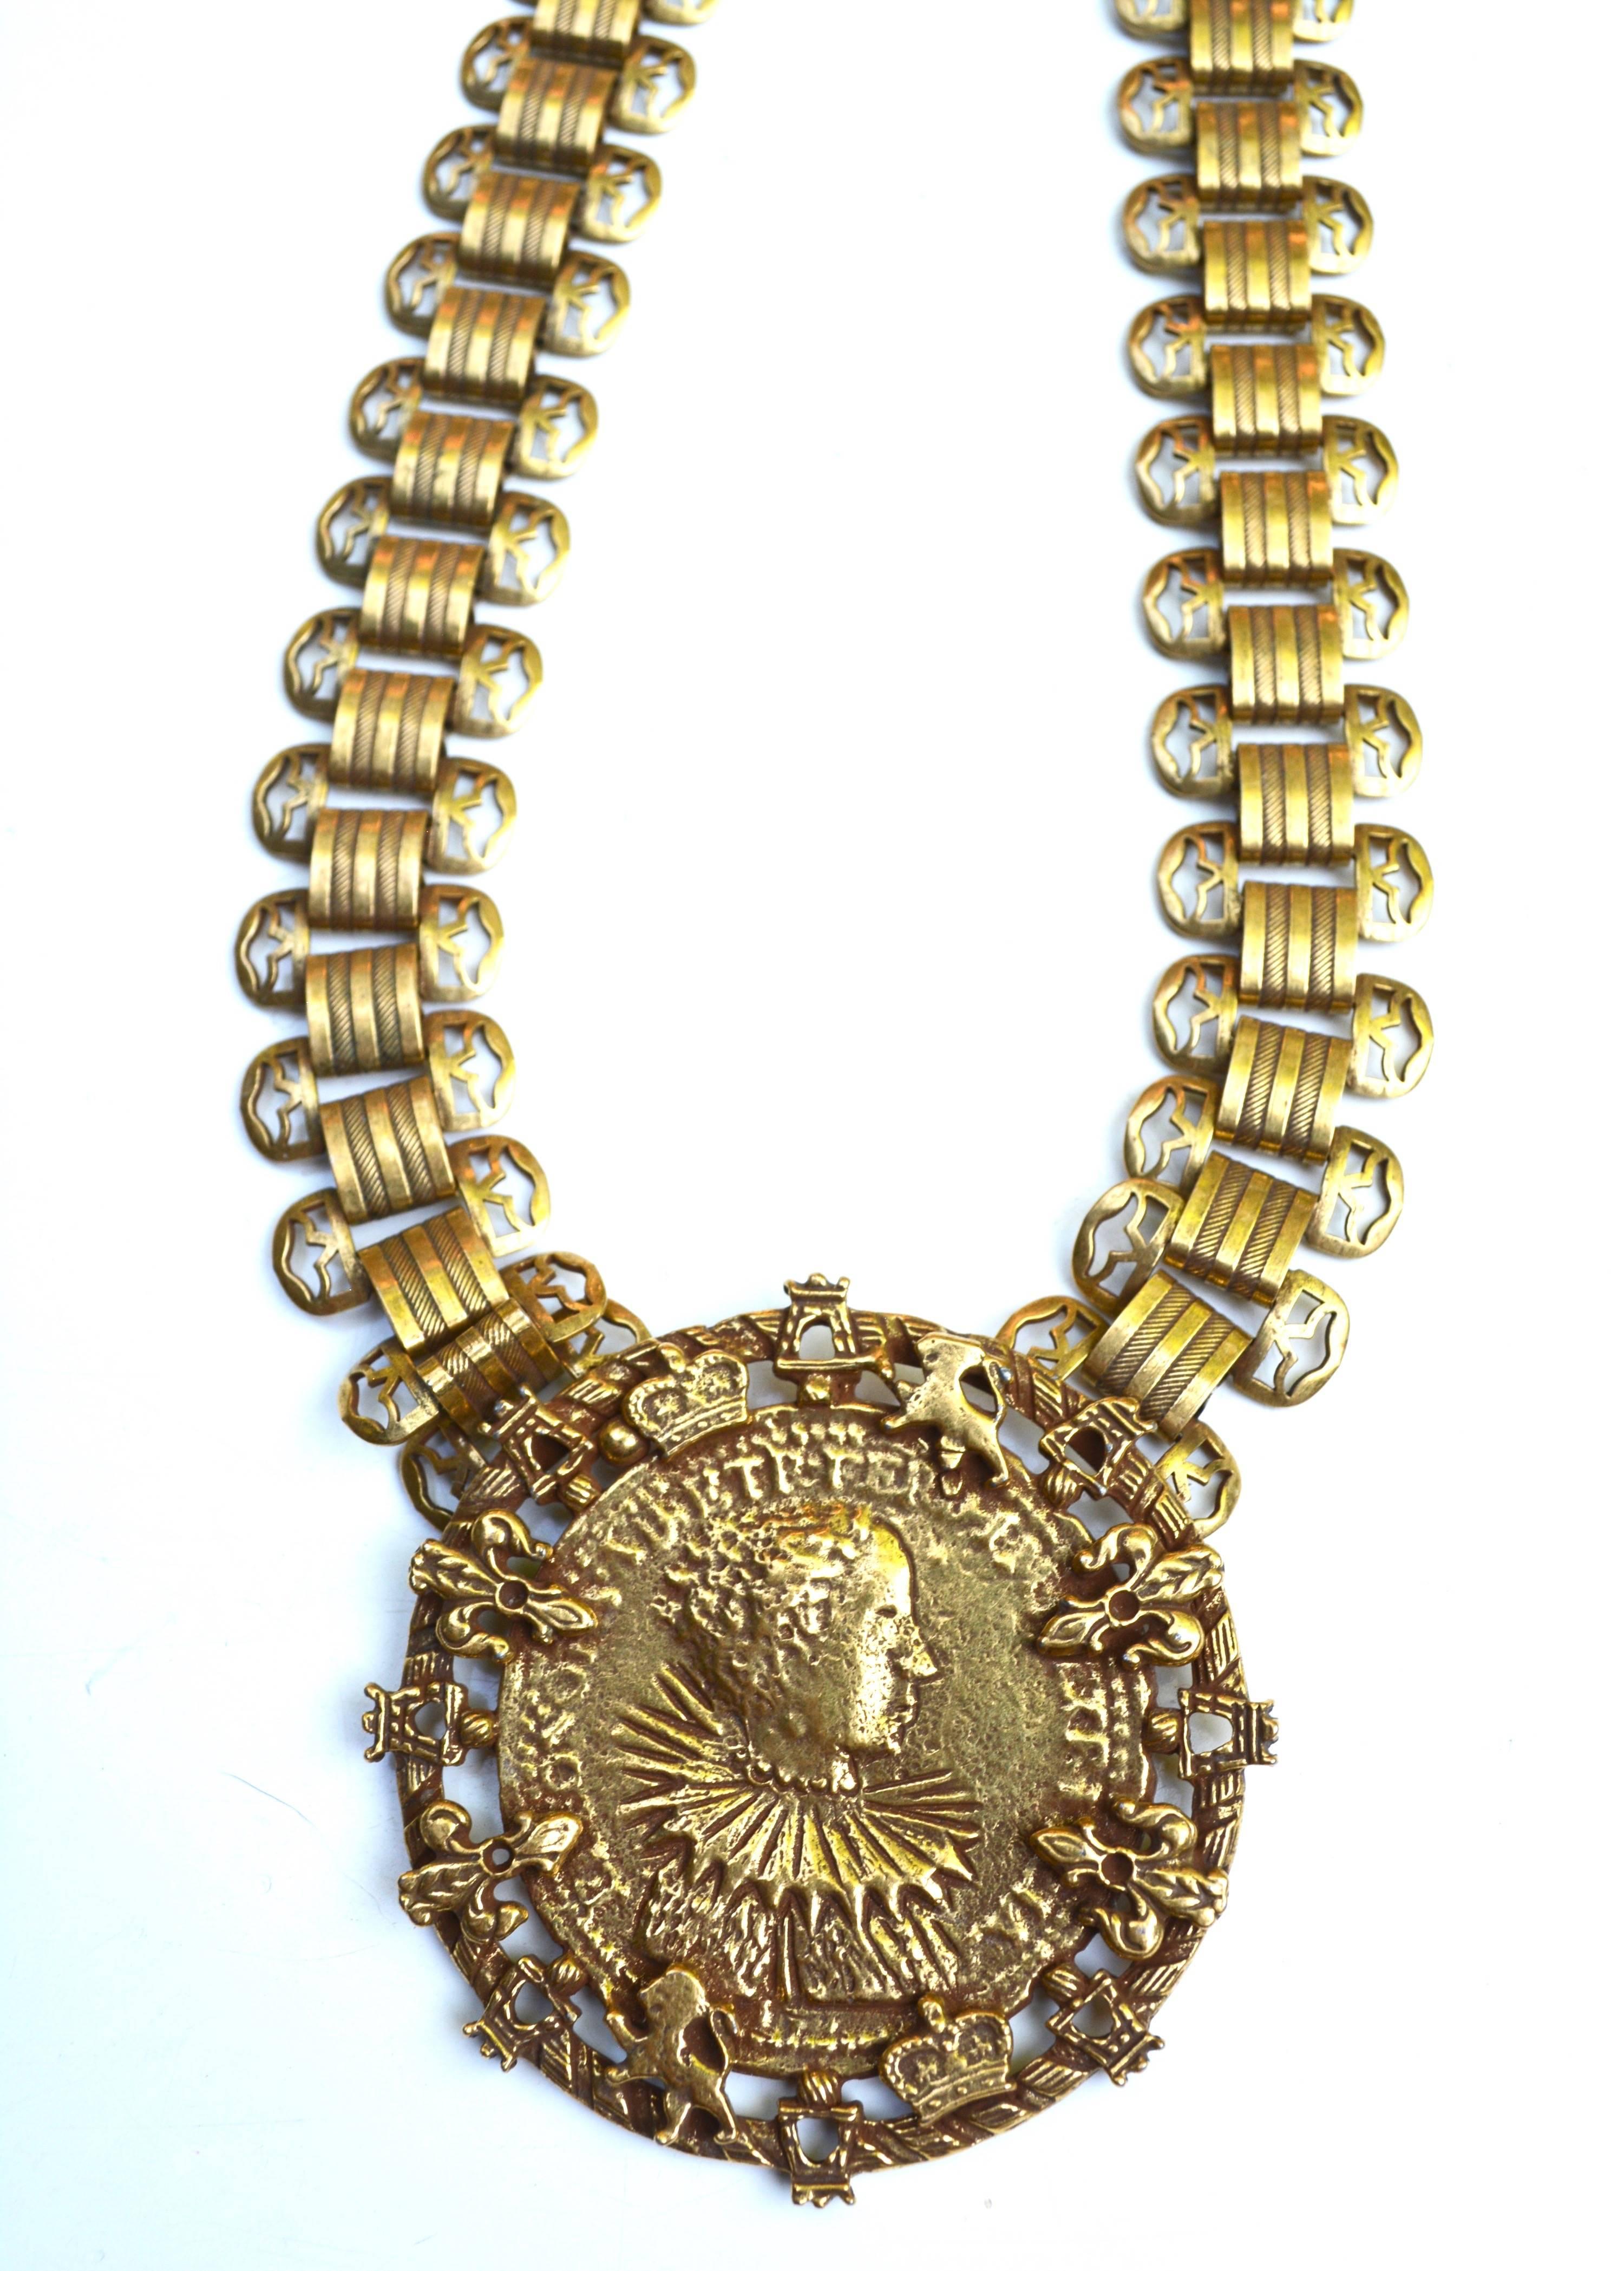 60s Goldette Medallion Necklace In Excellent Condition For Sale In Litchfield County, CT